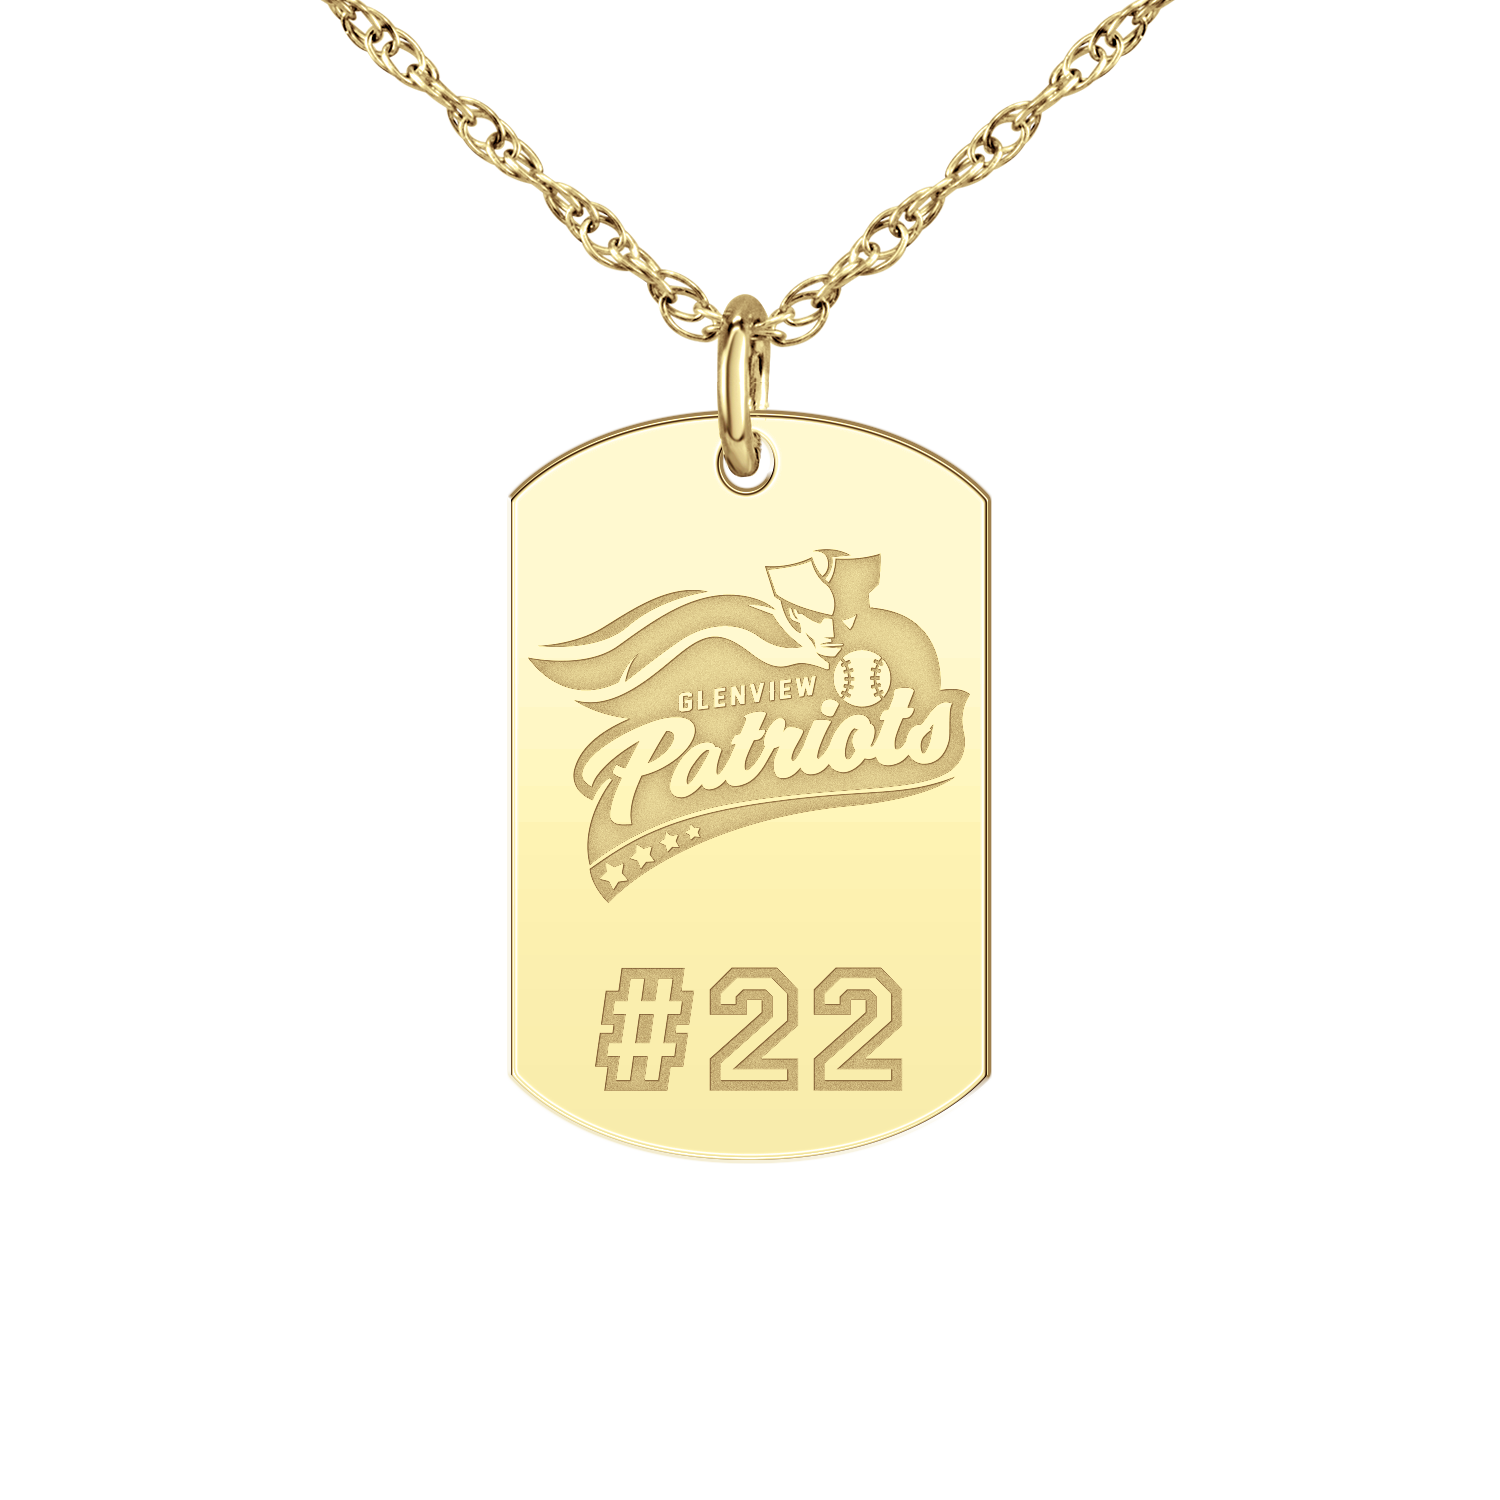 Glenview Patriots Player’s Number Tag Small